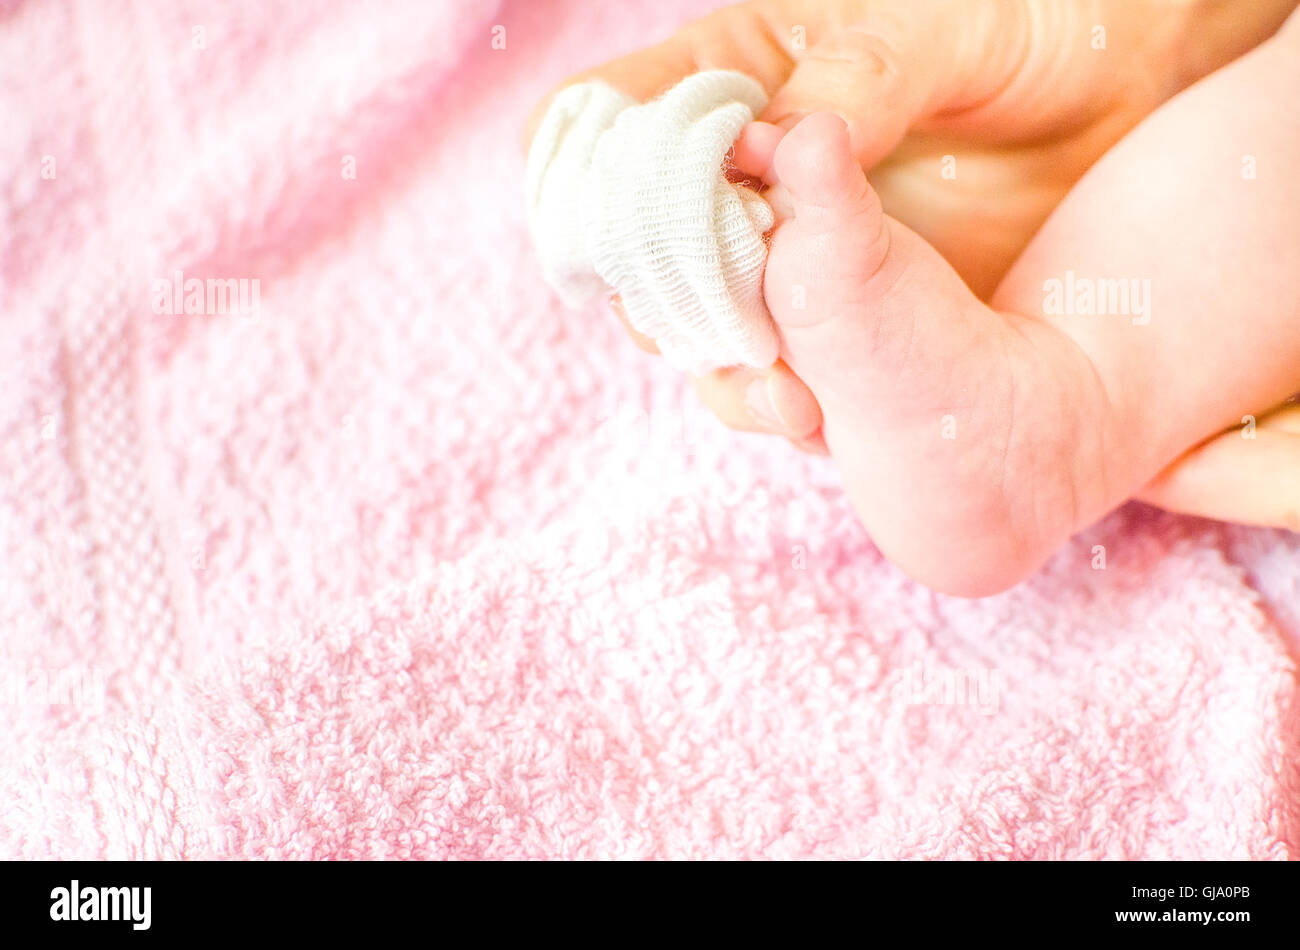 Mettere calze bianche a bebe Foto Stock